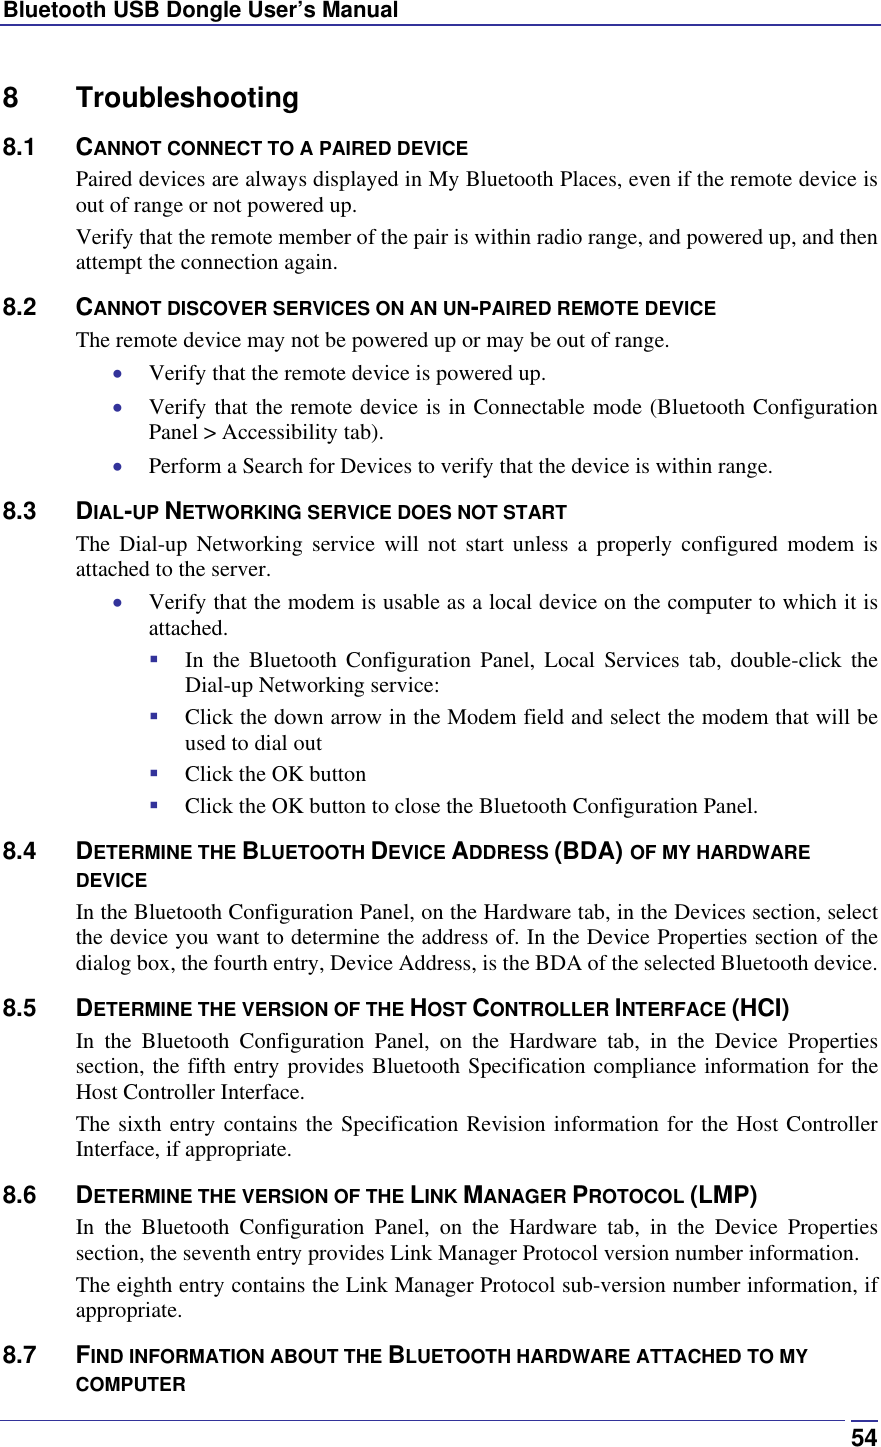 Bluetooth USB Dongle User’s Manual  548 Troubleshooting 8.1 CANNOT CONNECT TO A PAIRED DEVICE Paired devices are always displayed in My Bluetooth Places, even if the remote device is out of range or not powered up. Verify that the remote member of the pair is within radio range, and powered up, and then attempt the connection again. 8.2 CANNOT DISCOVER SERVICES ON AN UN-PAIRED REMOTE DEVICE The remote device may not be powered up or may be out of range. •  Verify that the remote device is powered up. •  Verify that the remote device is in Connectable mode (Bluetooth Configuration Panel &gt; Accessibility tab). •  Perform a Search for Devices to verify that the device is within range. 8.3 DIAL-UP NETWORKING SERVICE DOES NOT START The Dial-up Networking service will not start unless a properly configured modem is attached to the server.  •  Verify that the modem is usable as a local device on the computer to which it is attached.   In the Bluetooth Configuration Panel, Local Services tab, double-click the Dial-up Networking service:   Click the down arrow in the Modem field and select the modem that will be used to dial out   Click the OK button   Click the OK button to close the Bluetooth Configuration Panel. 8.4 DETERMINE THE BLUETOOTH DEVICE ADDRESS (BDA) OF MY HARDWARE DEVICE In the Bluetooth Configuration Panel, on the Hardware tab, in the Devices section, select the device you want to determine the address of. In the Device Properties section of the dialog box, the fourth entry, Device Address, is the BDA of the selected Bluetooth device. 8.5 DETERMINE THE VERSION OF THE HOST CONTROLLER INTERFACE (HCI) In the Bluetooth Configuration Panel, on the Hardware tab, in the Device Properties section, the fifth entry provides Bluetooth Specification compliance information for the Host Controller Interface. The sixth entry contains the Specification Revision information for the Host Controller Interface, if appropriate. 8.6 DETERMINE THE VERSION OF THE LINK MANAGER PROTOCOL (LMP) In the Bluetooth Configuration Panel, on the Hardware tab, in the Device Properties section, the seventh entry provides Link Manager Protocol version number information. The eighth entry contains the Link Manager Protocol sub-version number information, if appropriate. 8.7 FIND INFORMATION ABOUT THE BLUETOOTH HARDWARE ATTACHED TO MY COMPUTER 